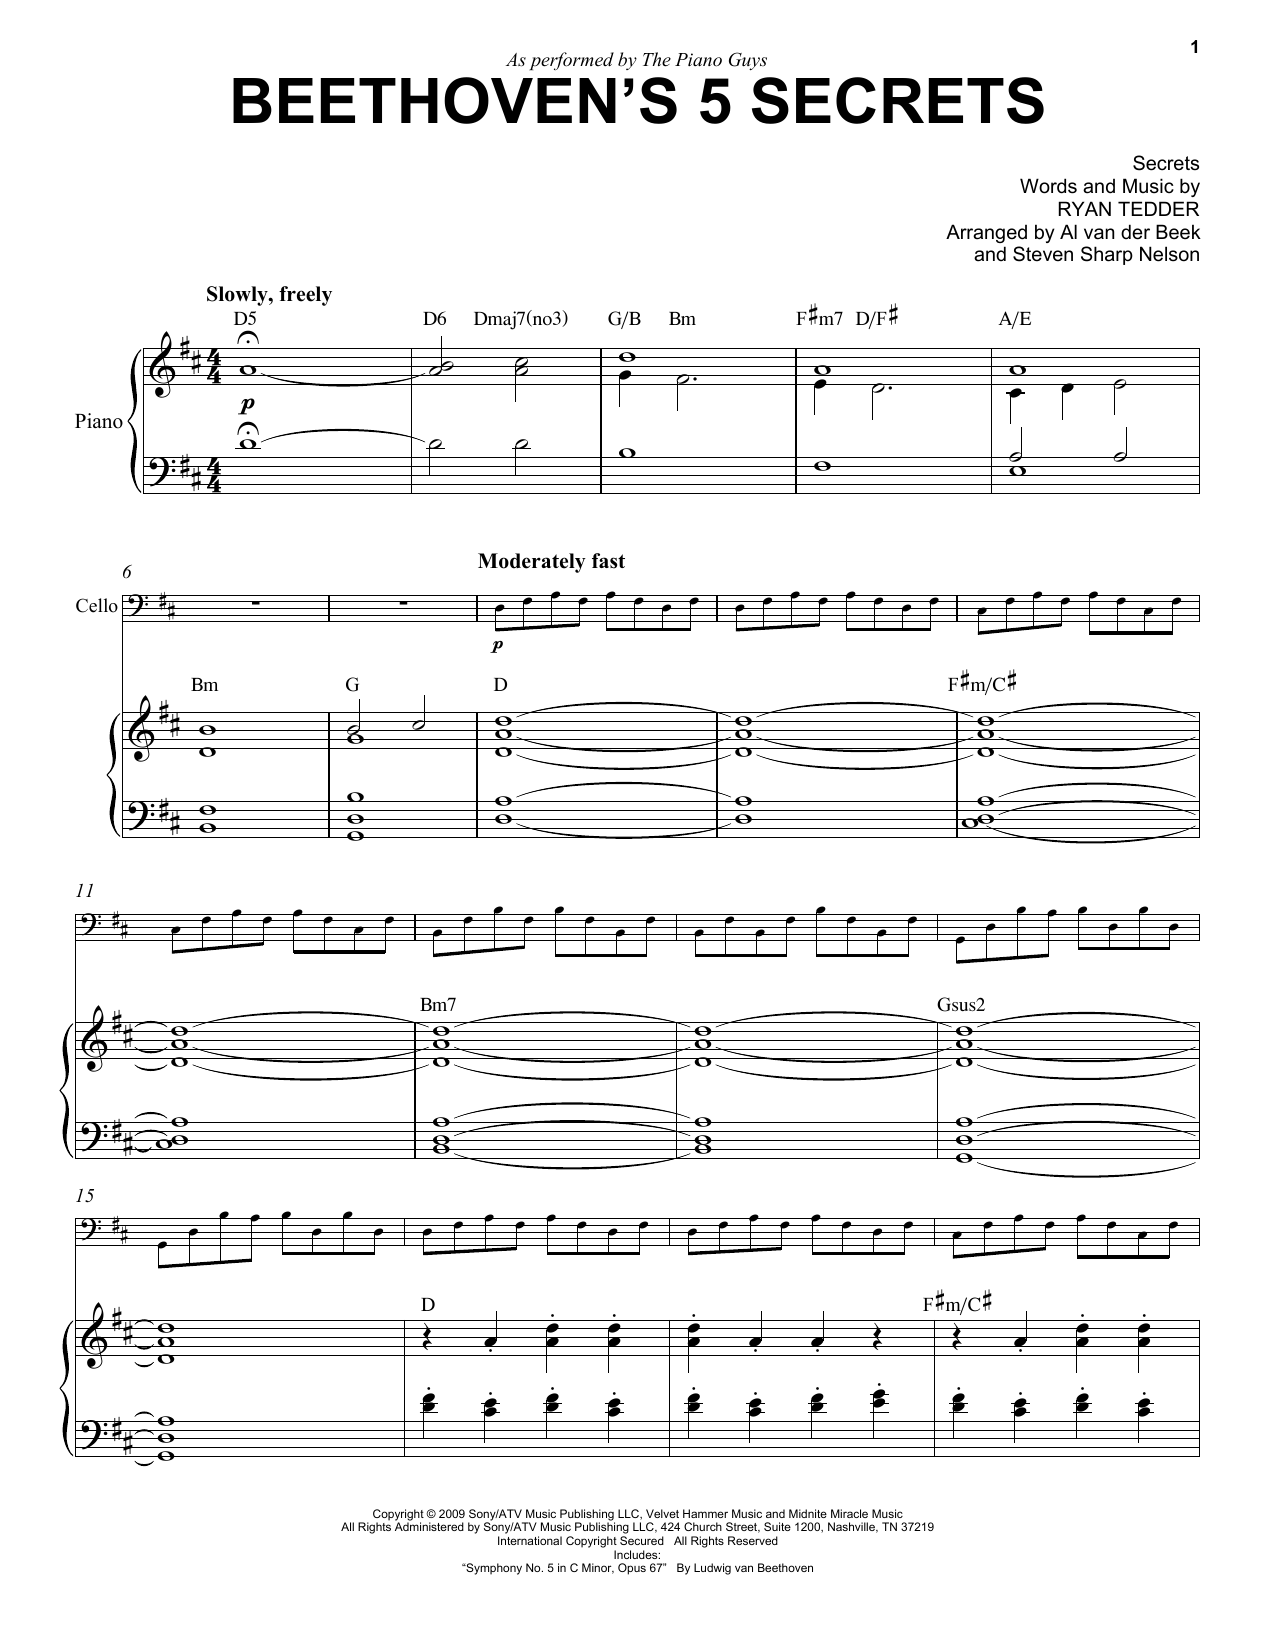 Download The Piano Guys Beethoven's 5 Secrets Sheet Music